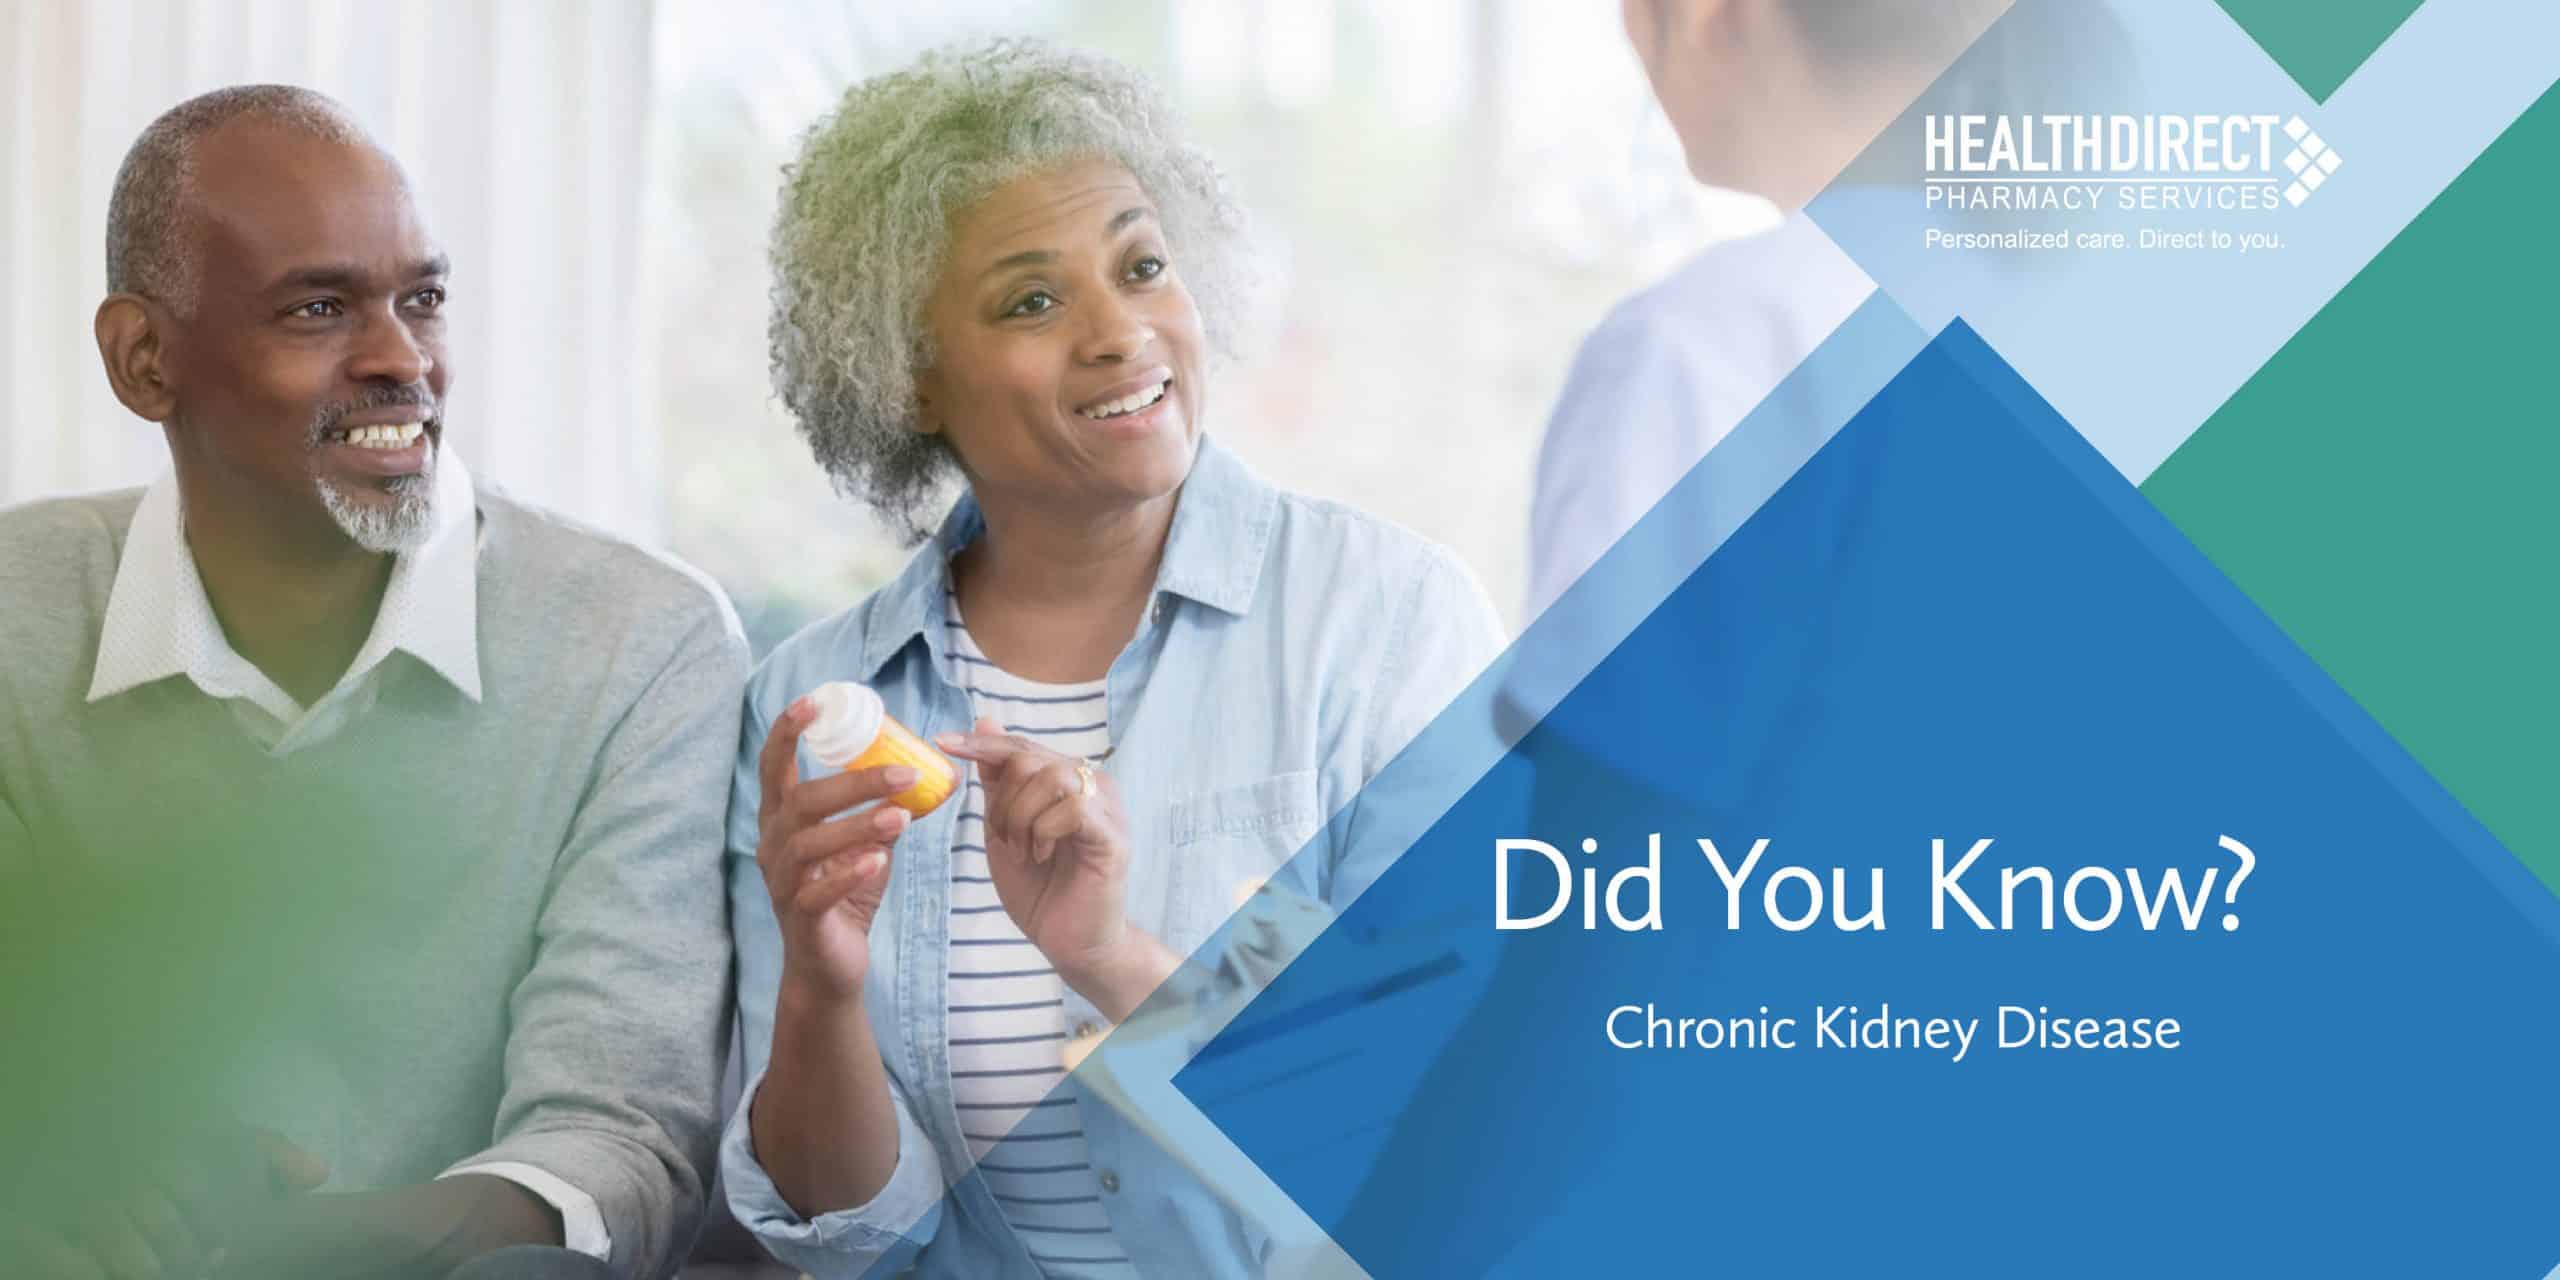 Did You Know? Chronic Kidney Disease